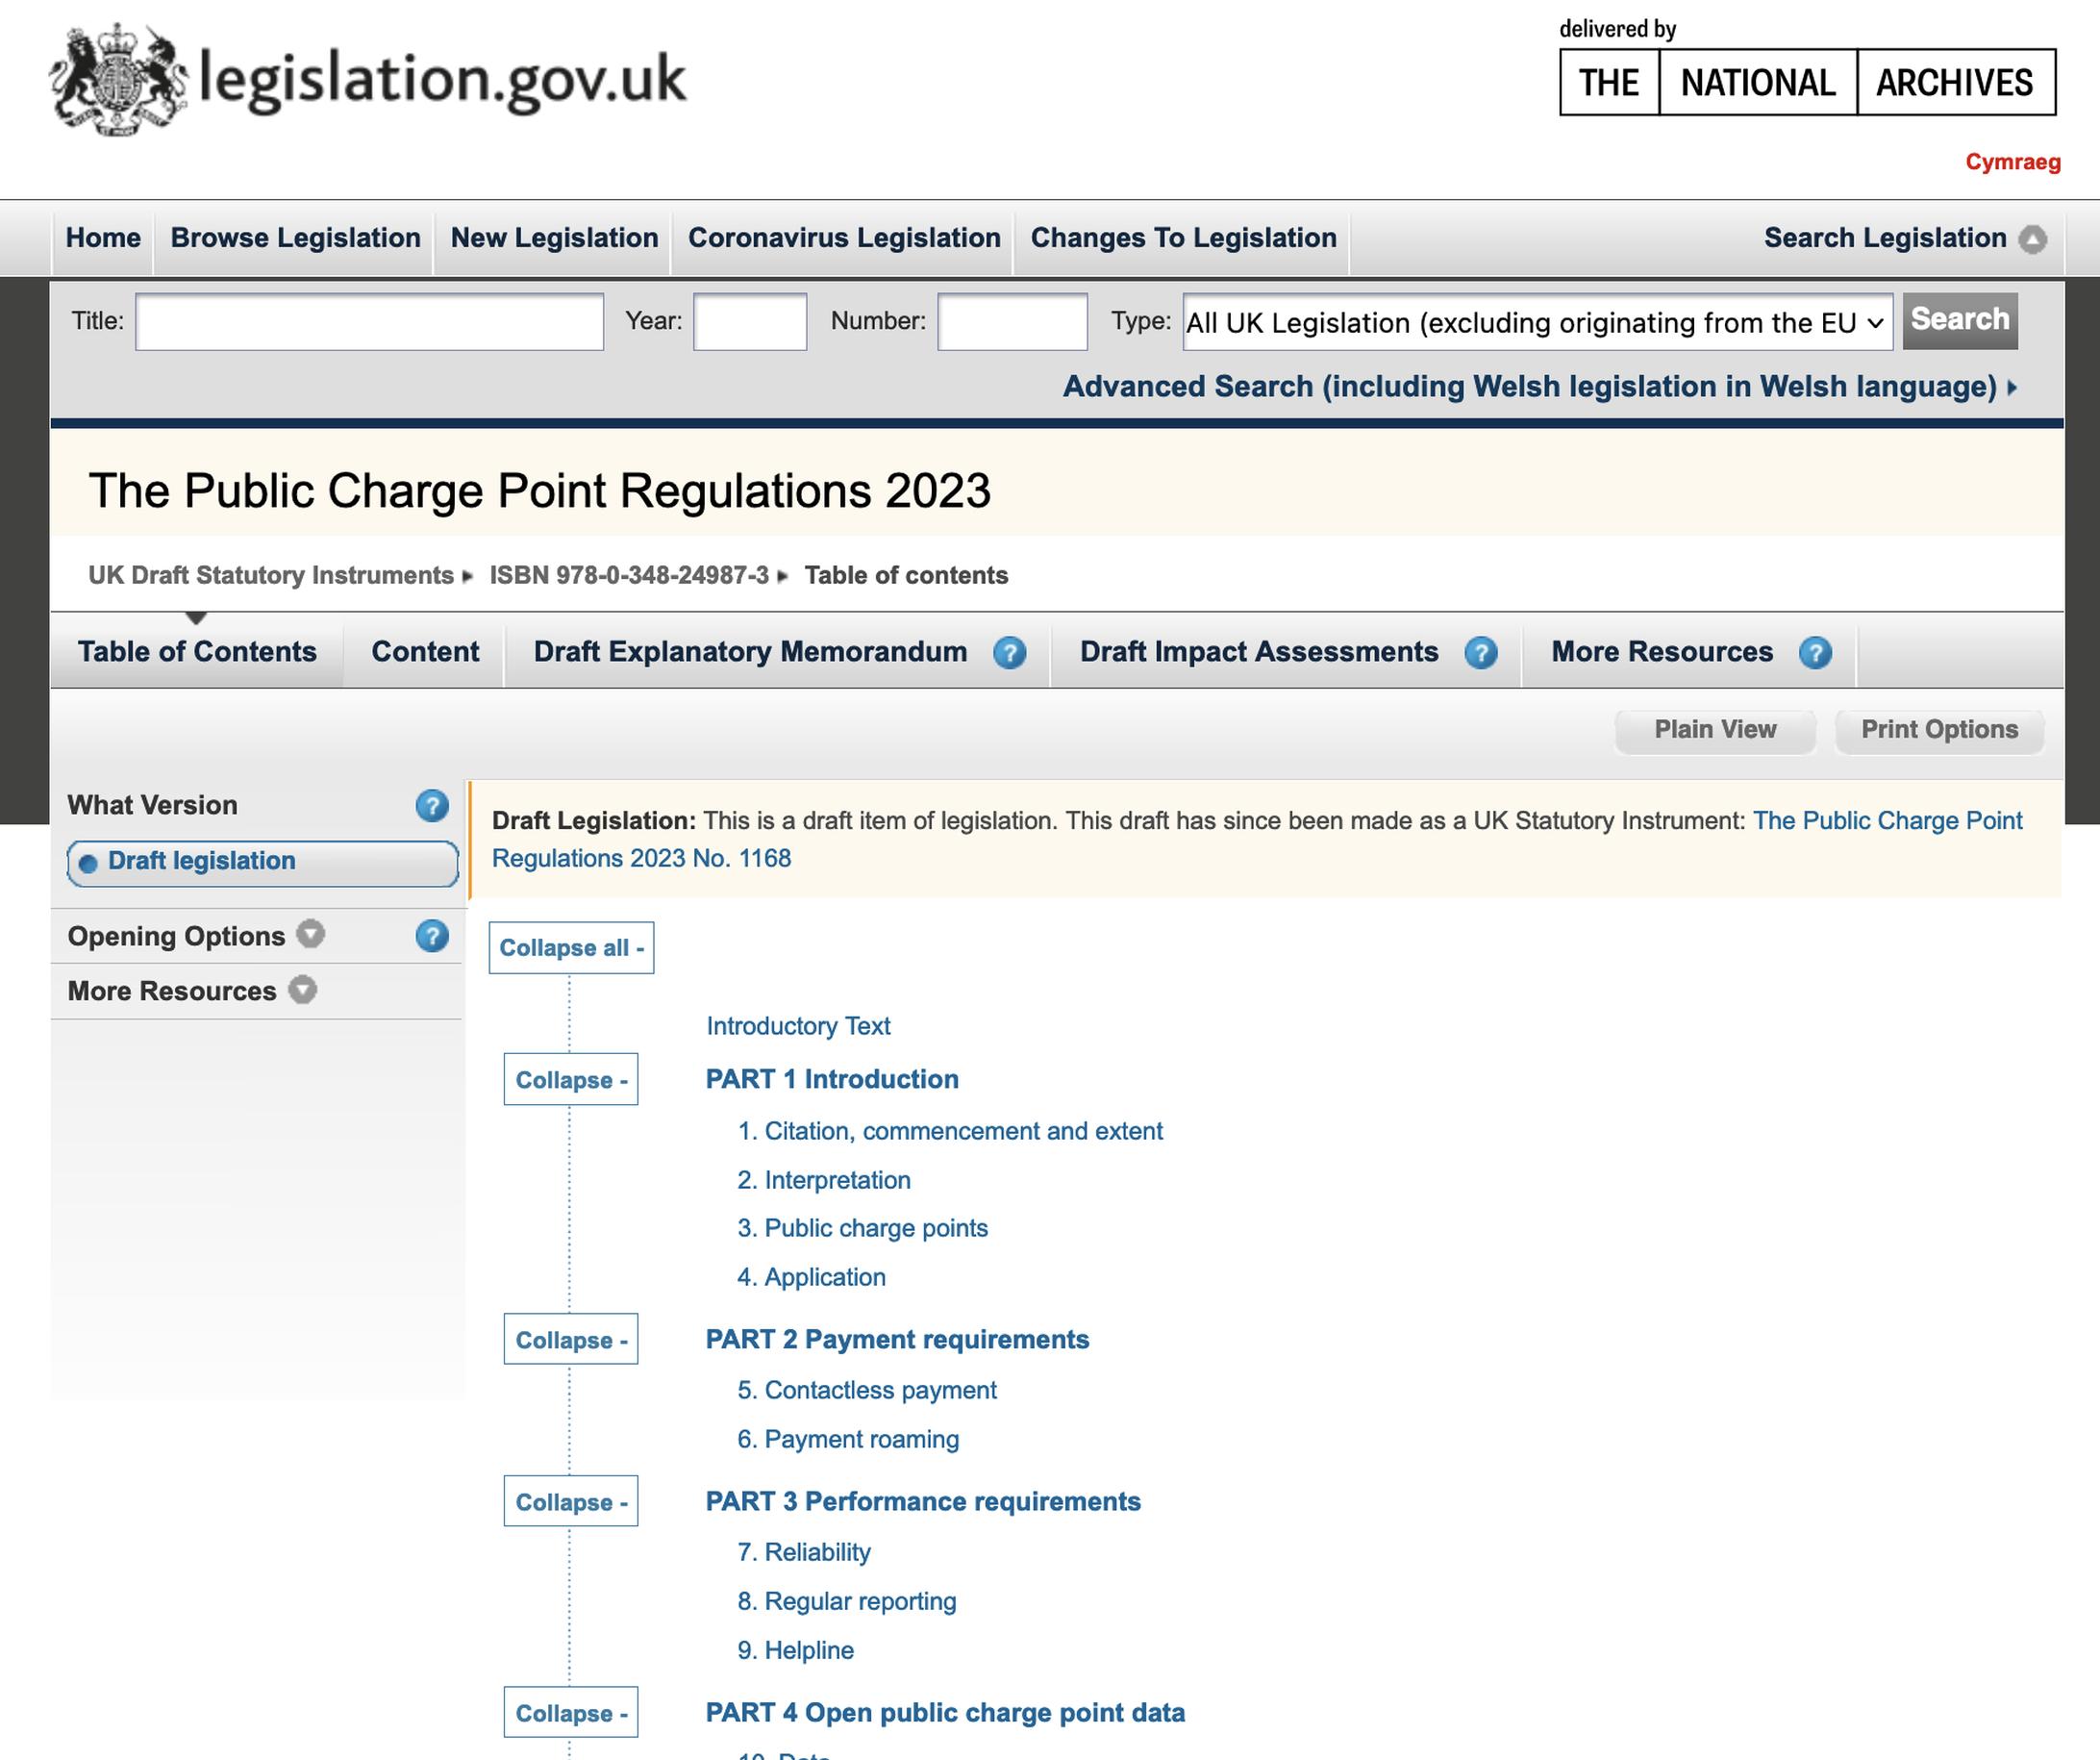 Public chargepoint regulations and guidance published